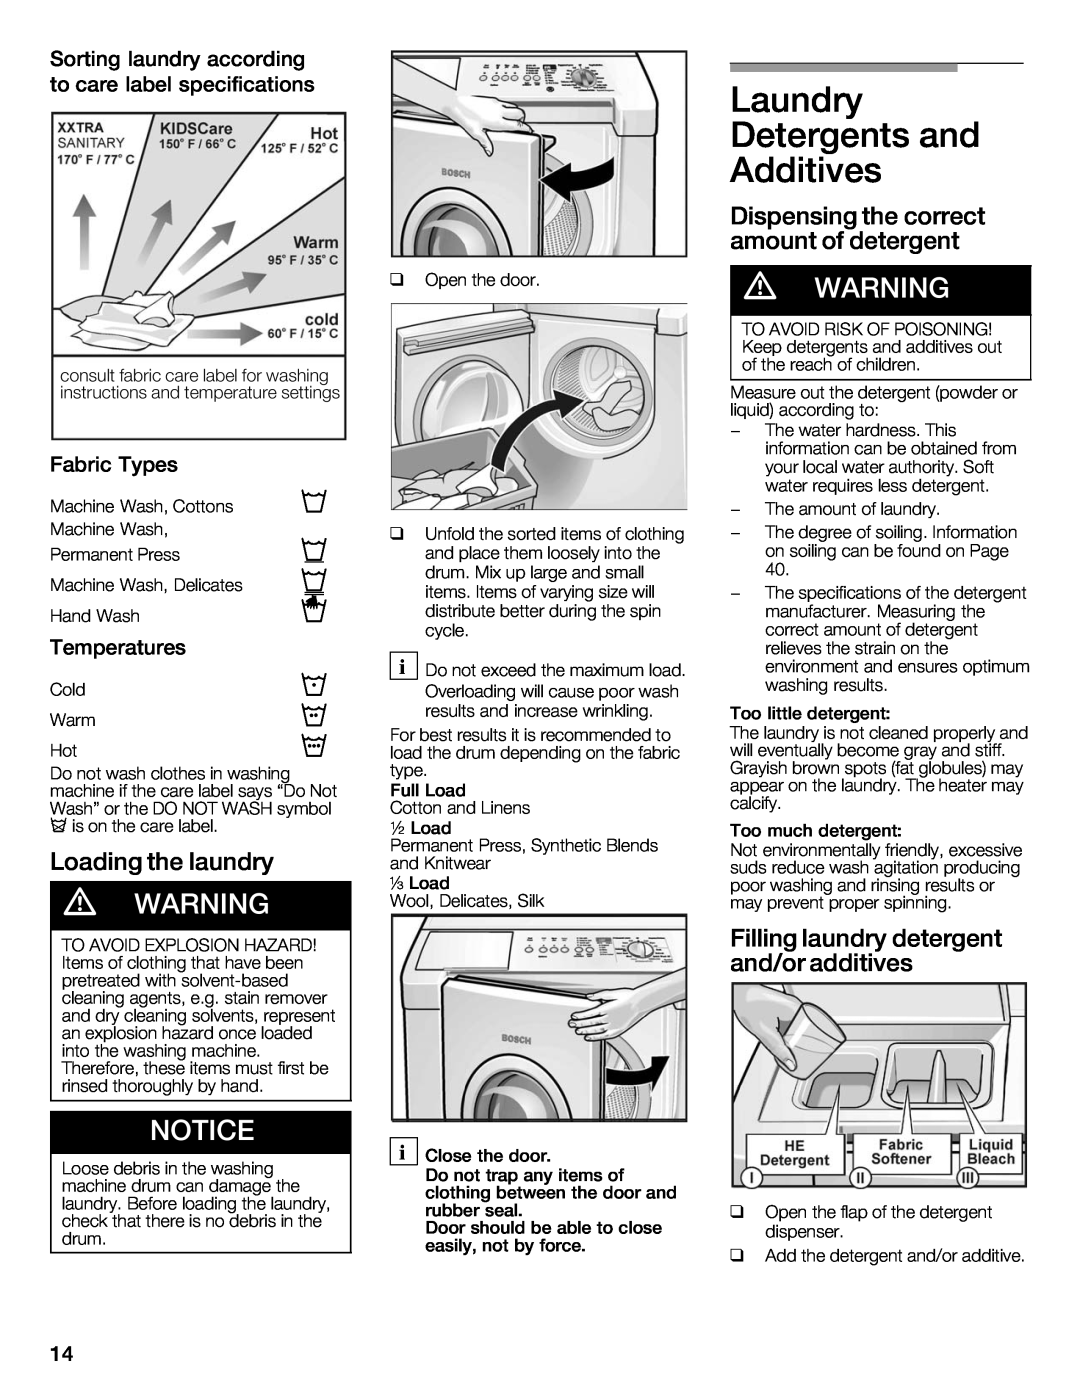 Bosch Appliances 500 Plus Series manual Laundry Detergents and Additives, d WARNING 